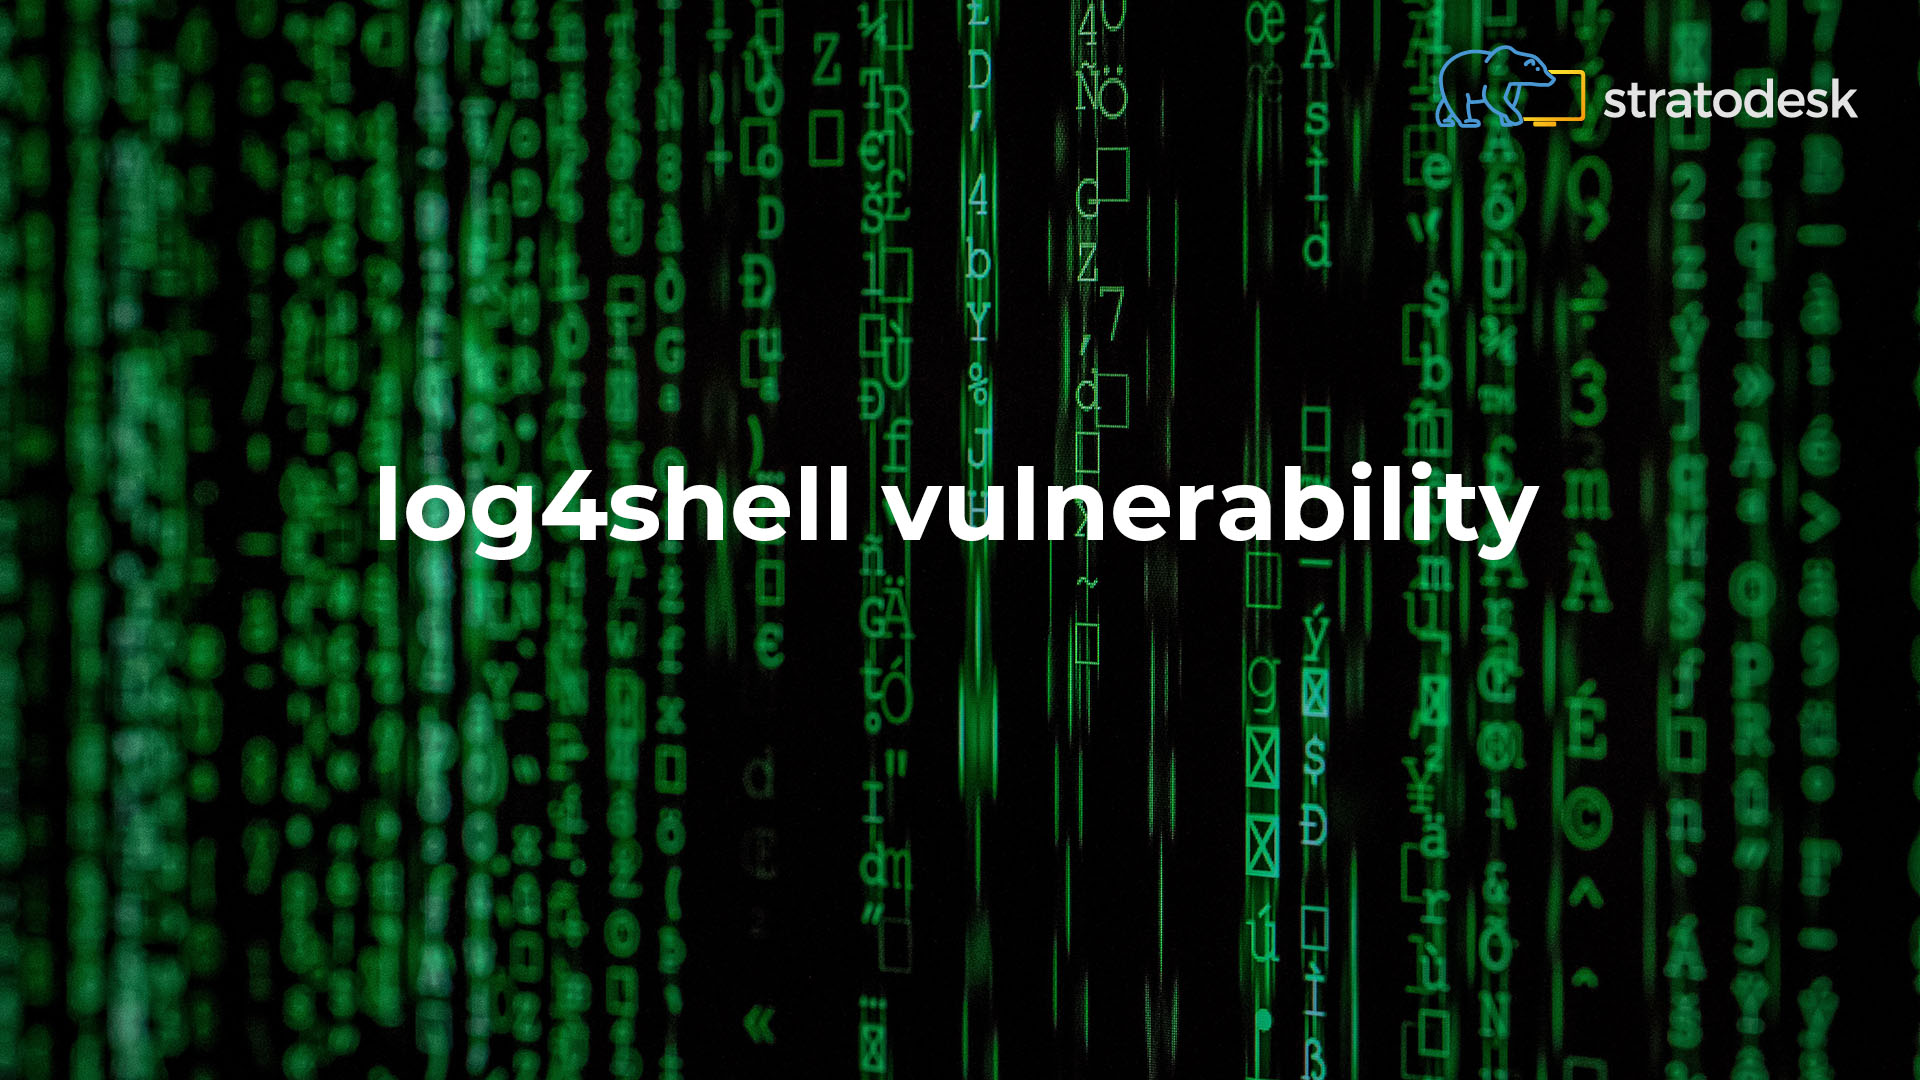 The log4shell vulnerability – What to know